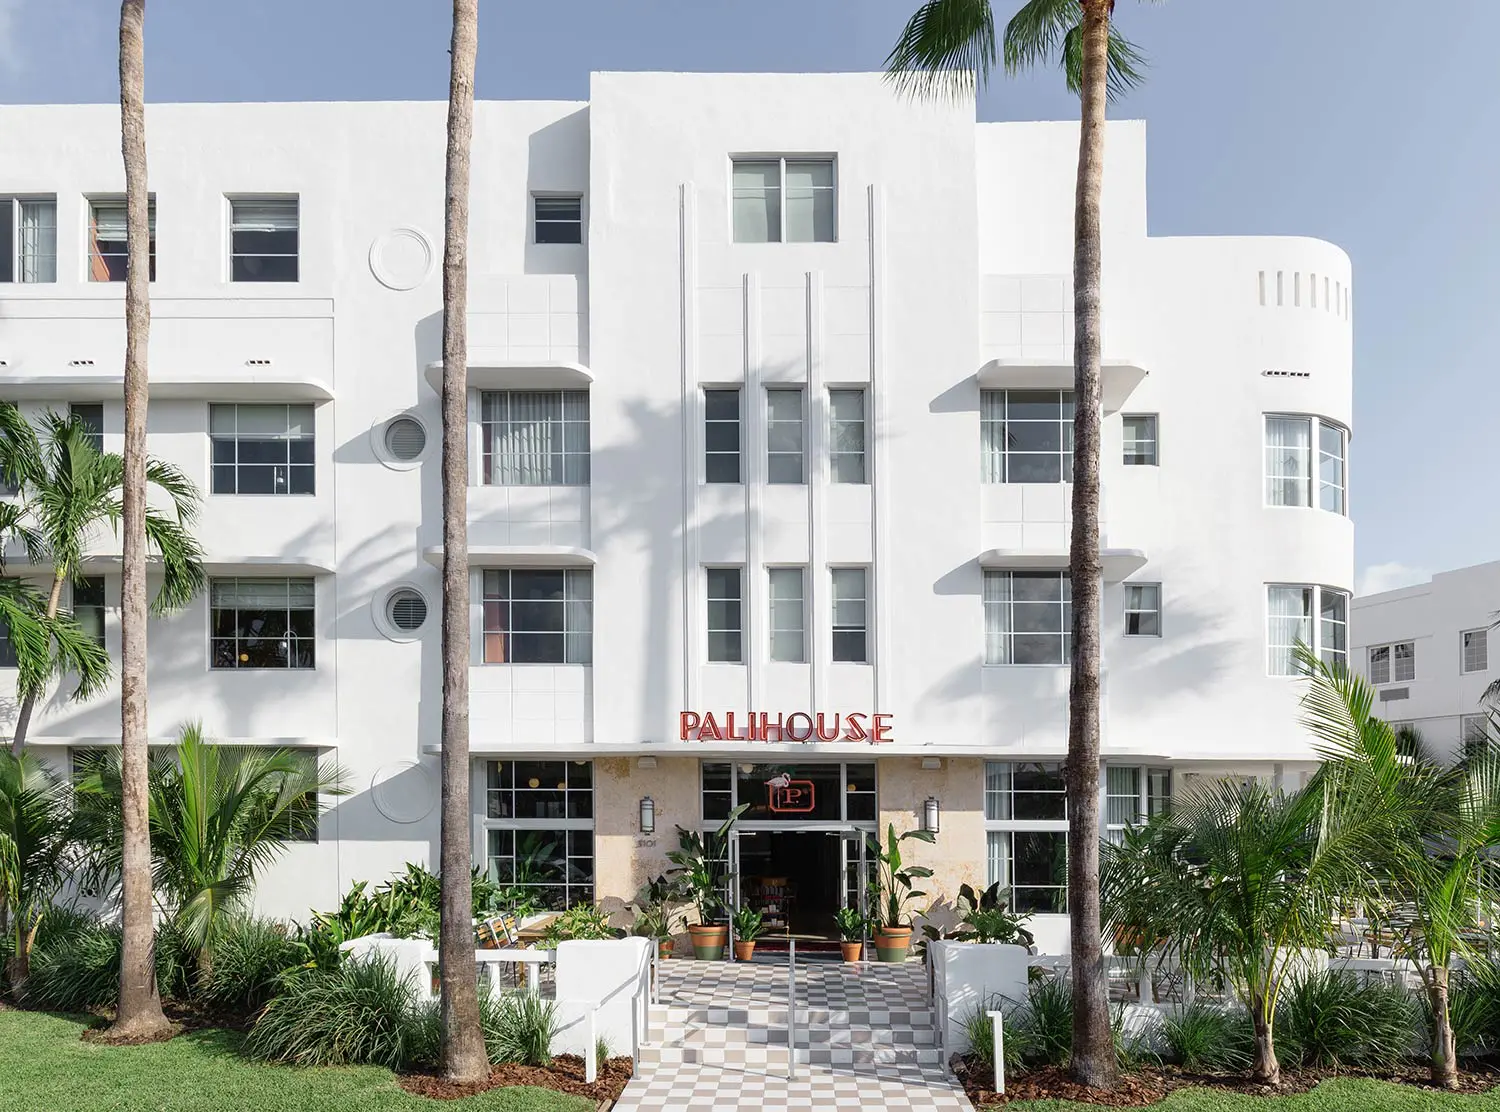 The gorgeous façade of the ‘40s era Greenbriar Hotel is now home to  Palisociety’s Miami outpost 